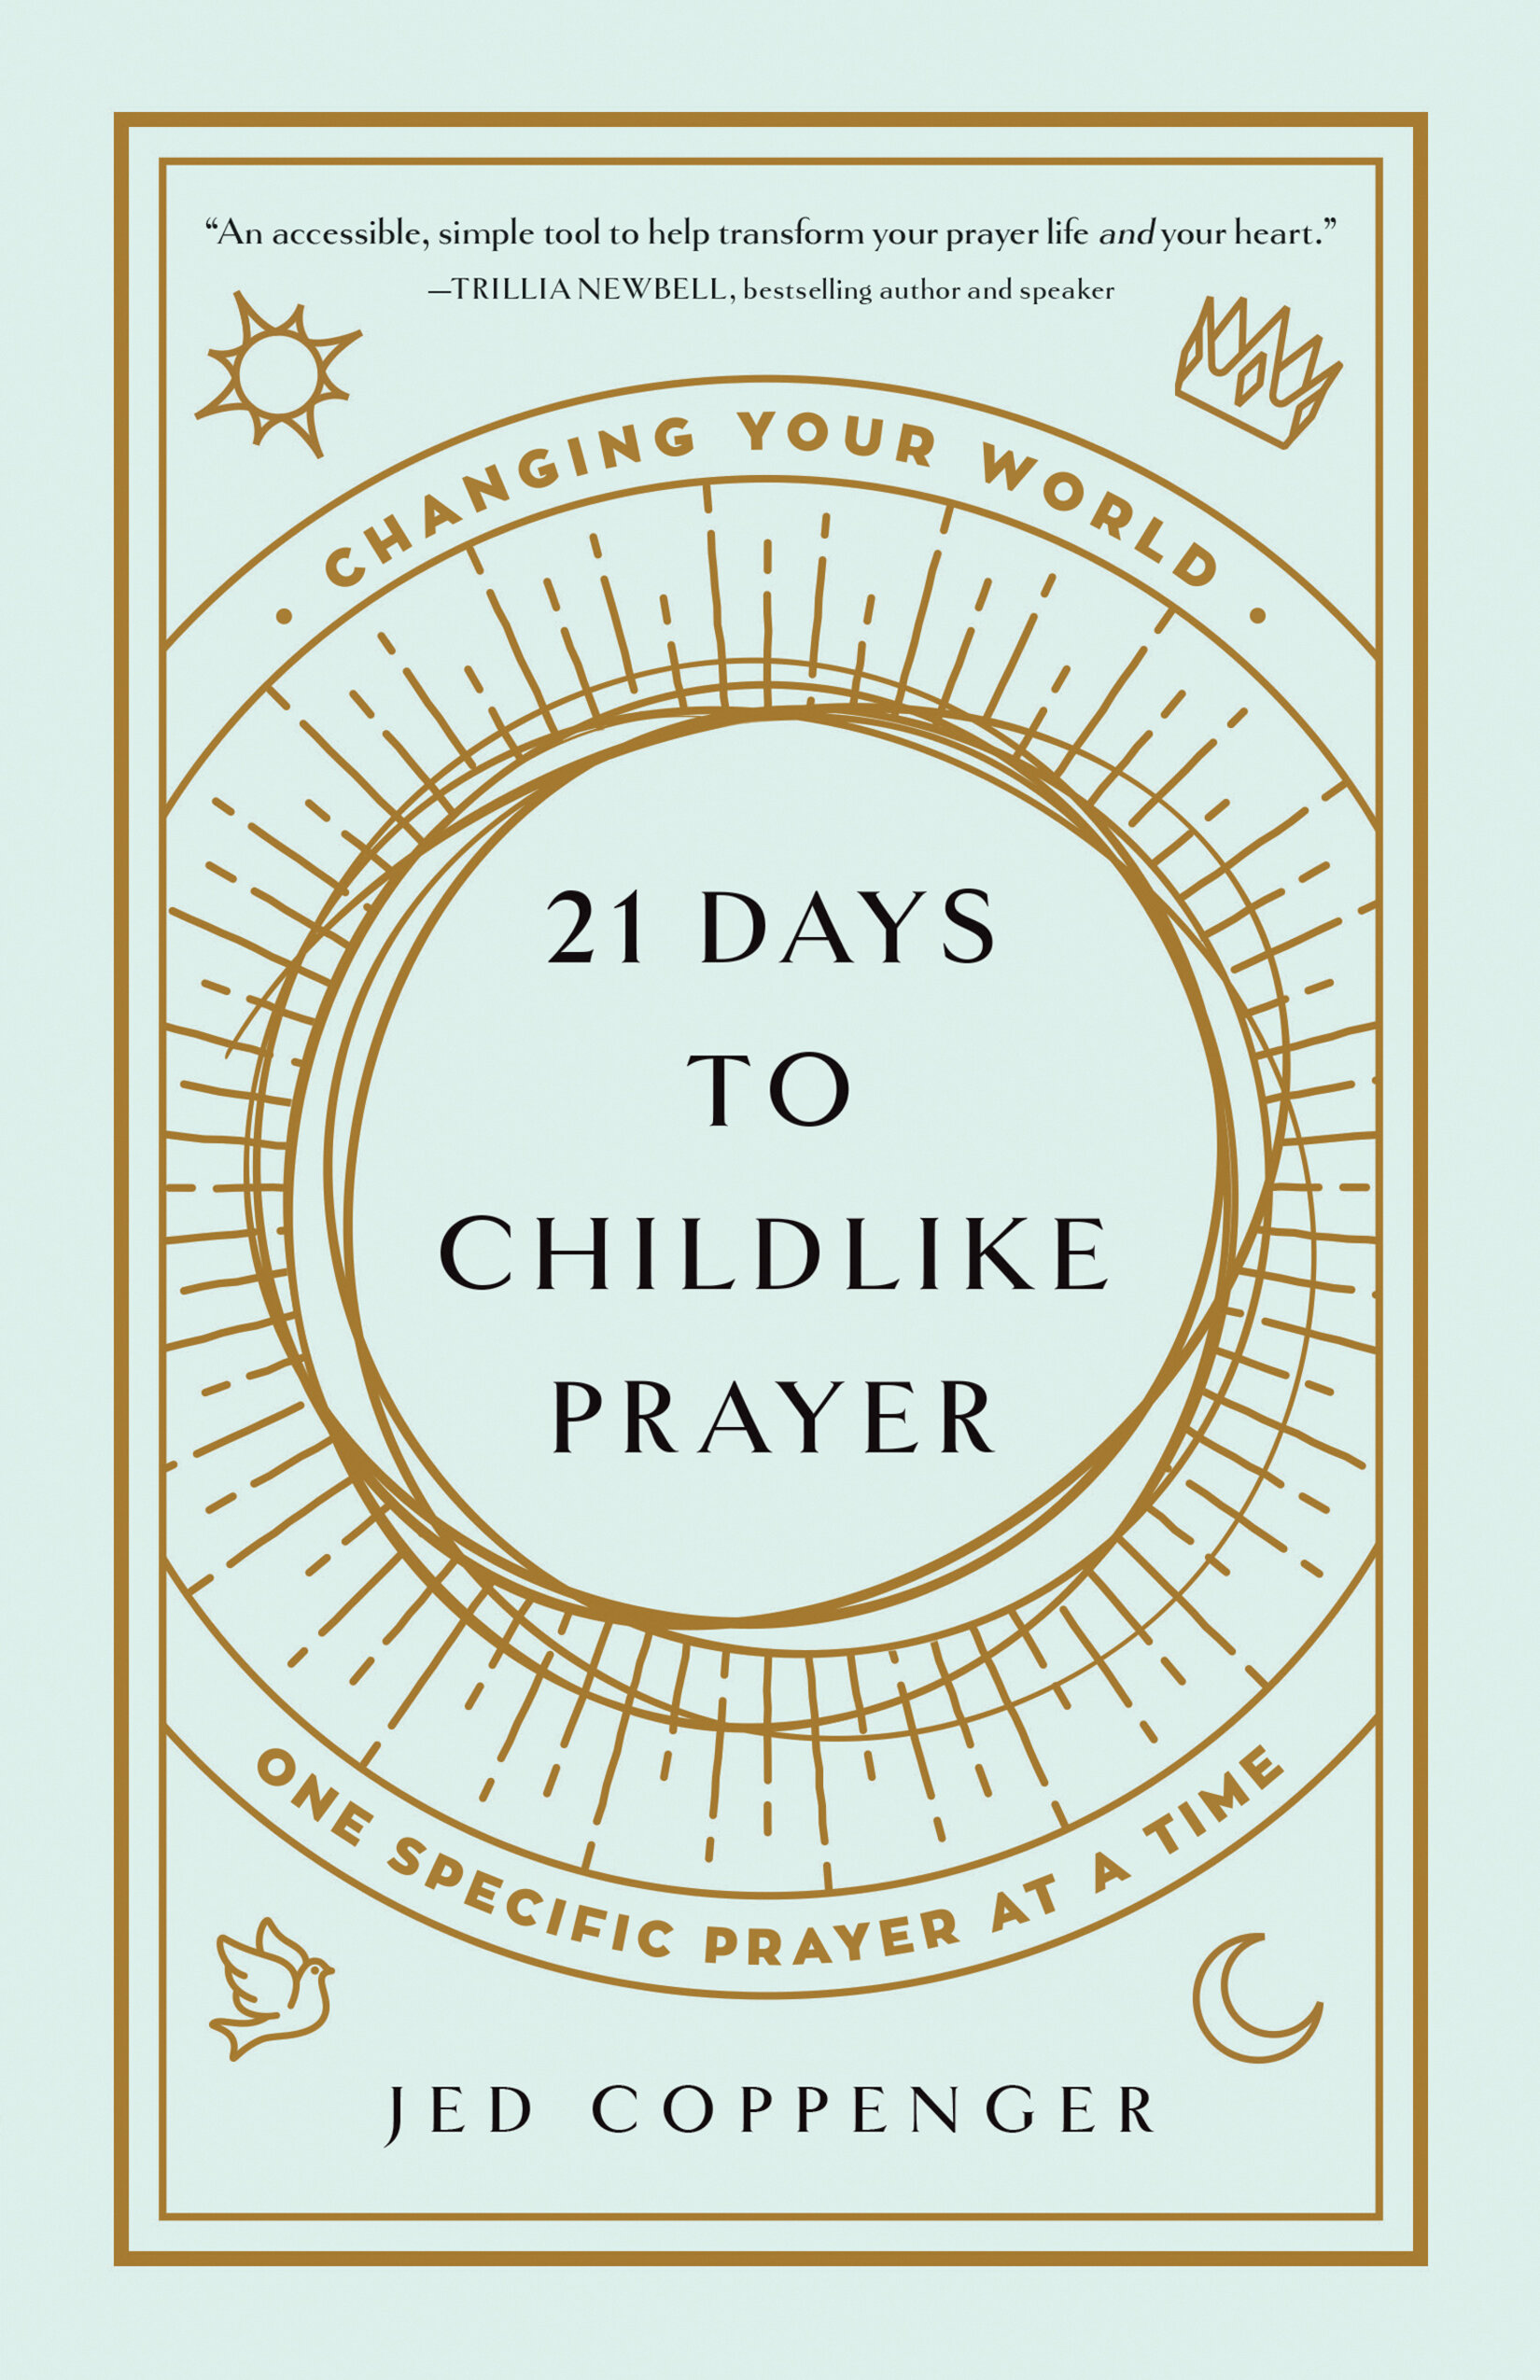 21 Days to Childlike Prayer: Changing Your World One Specific Prayer at a Time